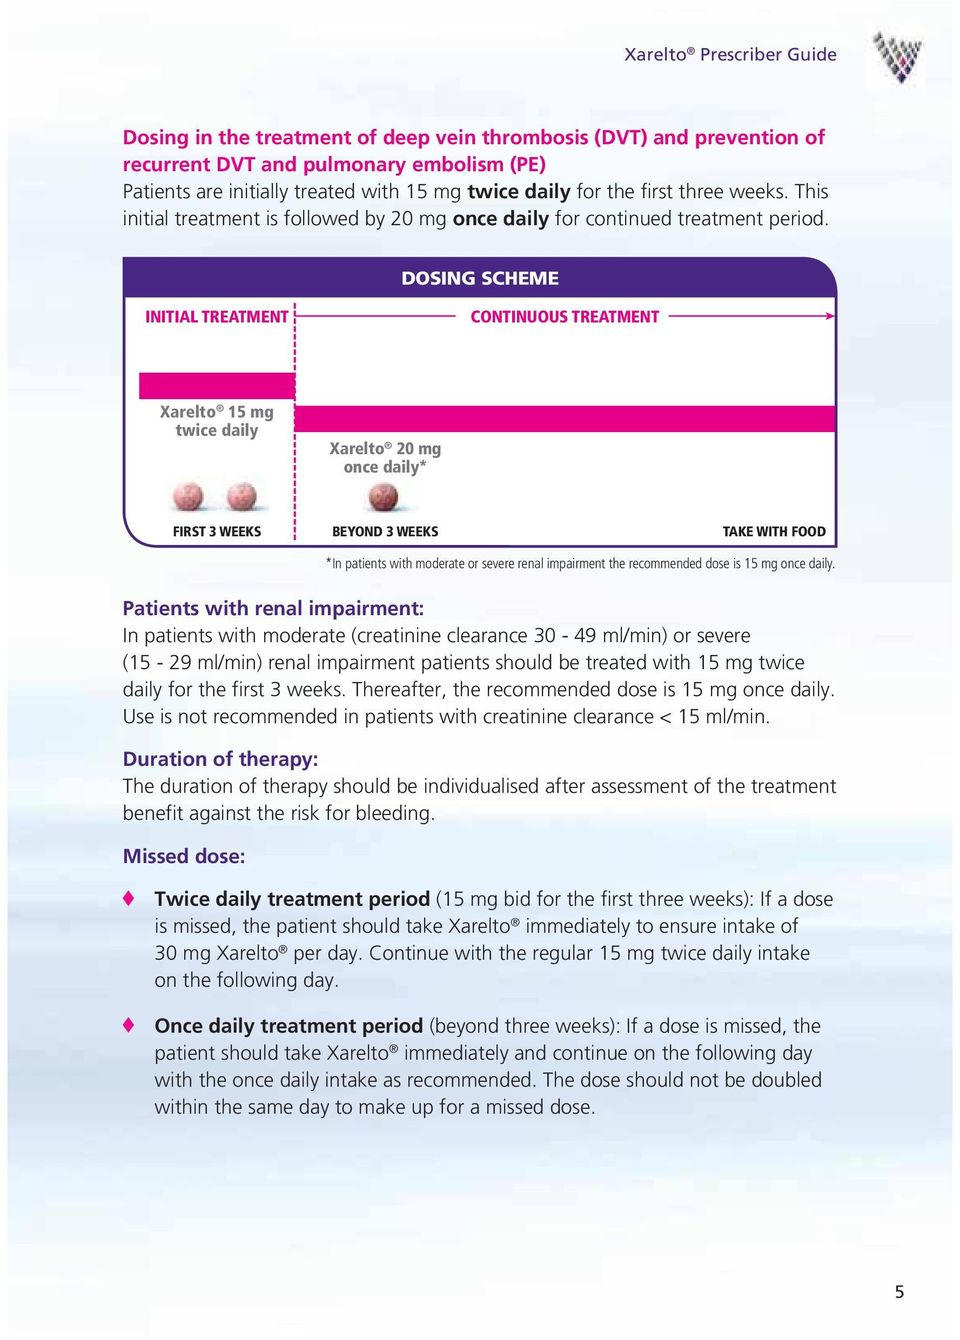 DOSING SCHEME INITIAL TREATMENT CONTINUOUS TREATMENT Xarelto 15 mg twice daily Xarelto 20 mg once daily* FIRST 3 WEEKS BEYOND 3 WEEKS TAKE WITH FOOD *In patients with moderate or severe renal